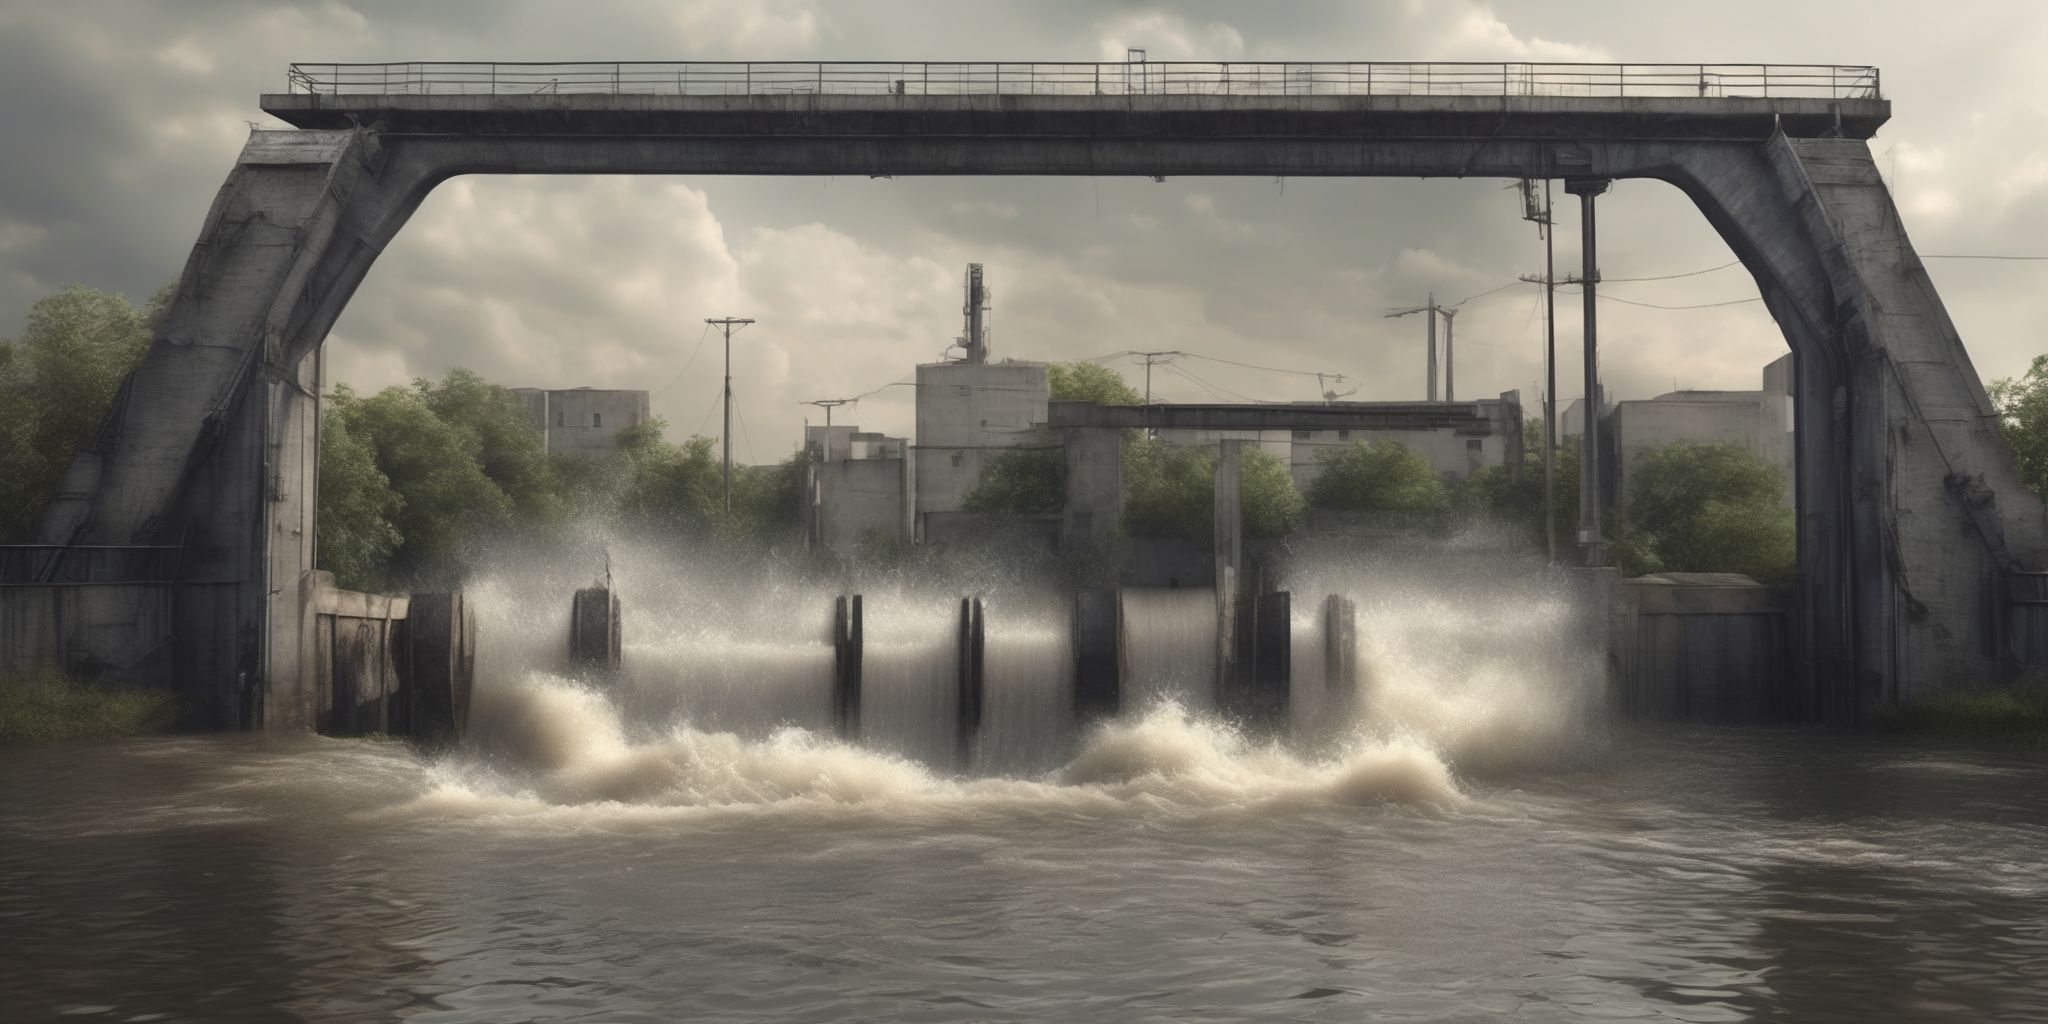 Floodgate  in realistic, photographic style